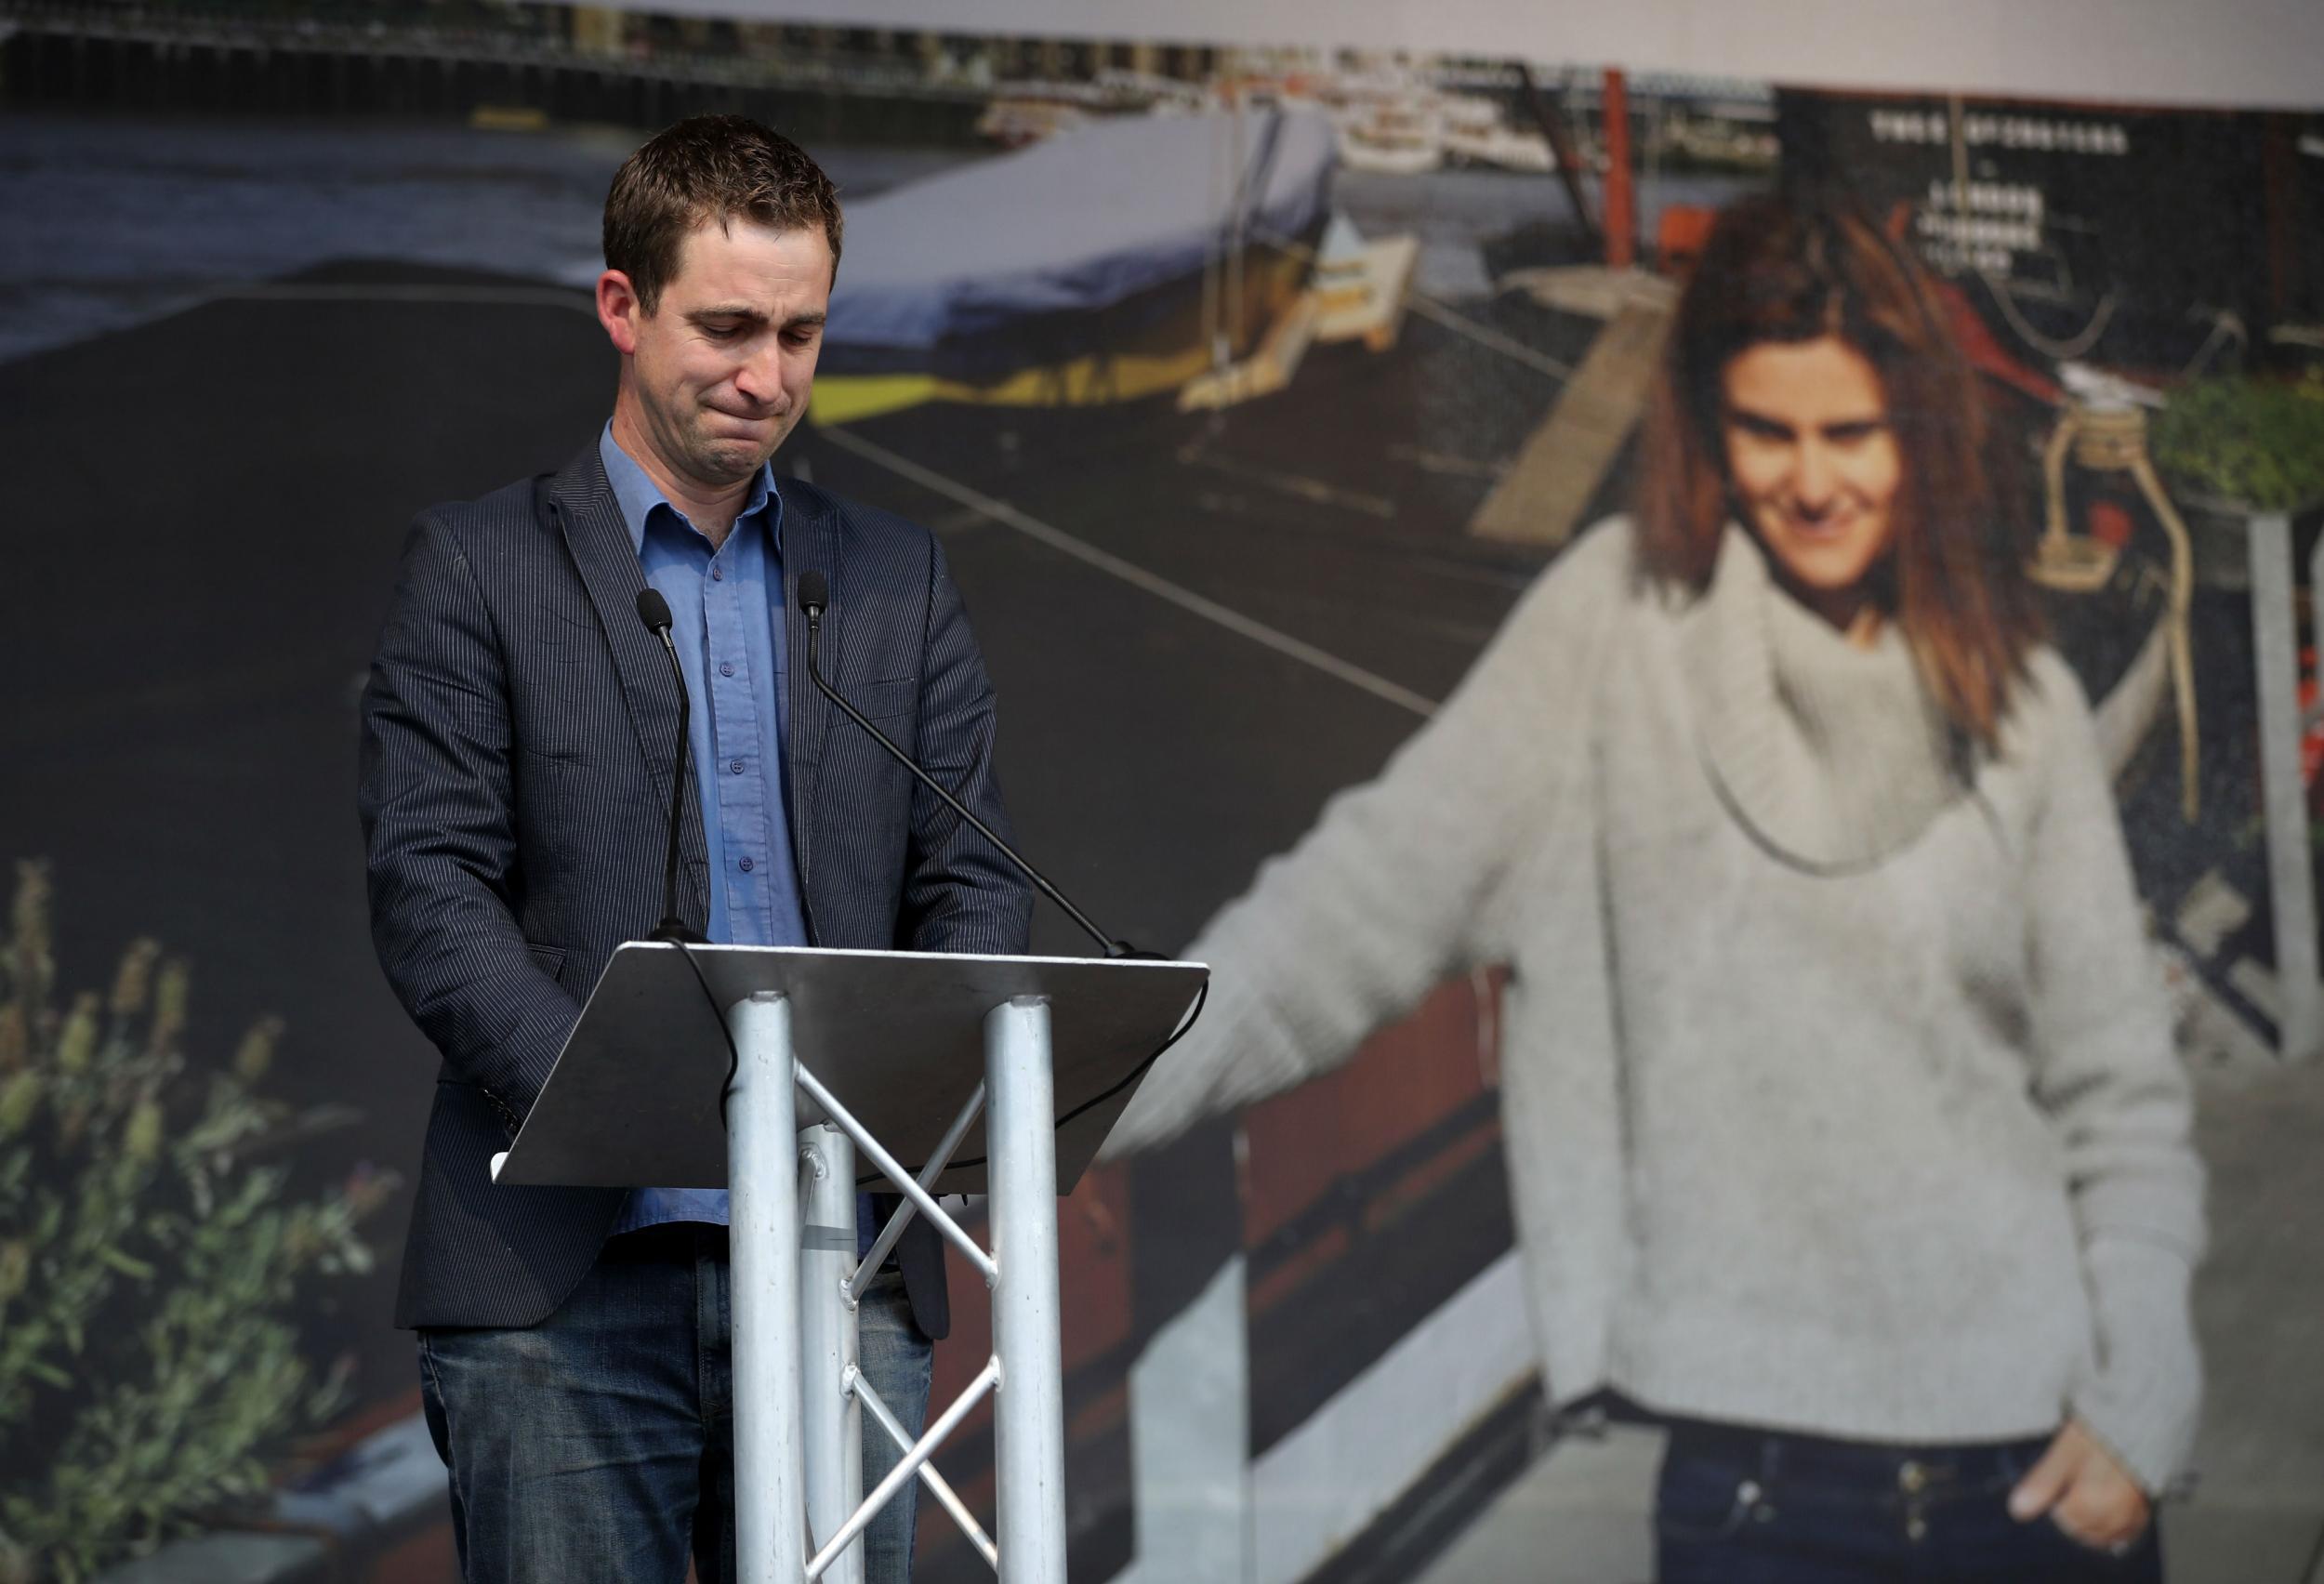 Brendan Cox, the husband of murdered MP Jo Cox, is among those who have signed the open letter to party leaders